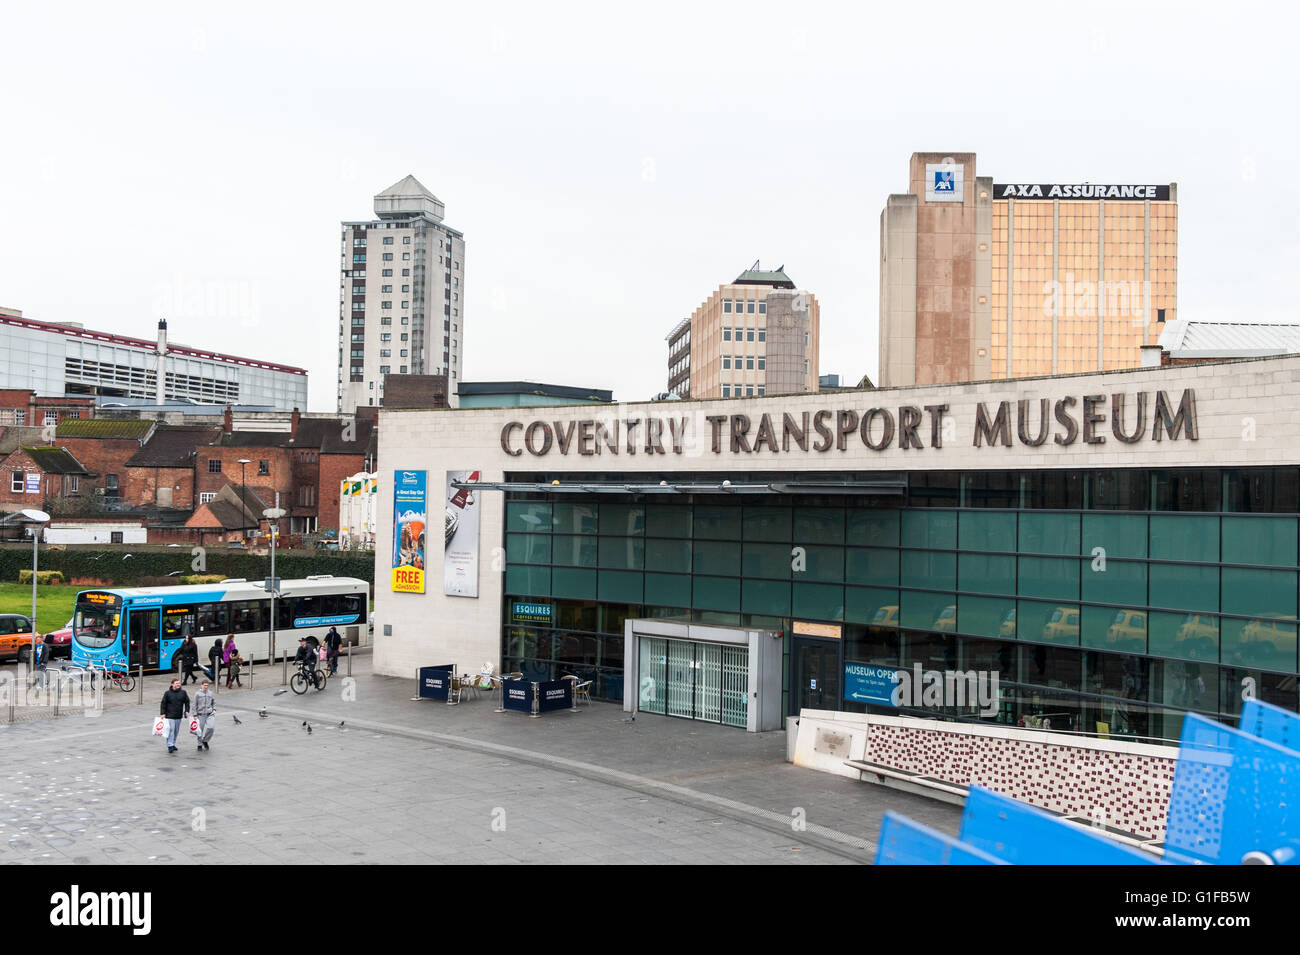 The Coventry Transport Museum, Millenium Place, Coventry, West Midlands, United Kingdom Stock Photo